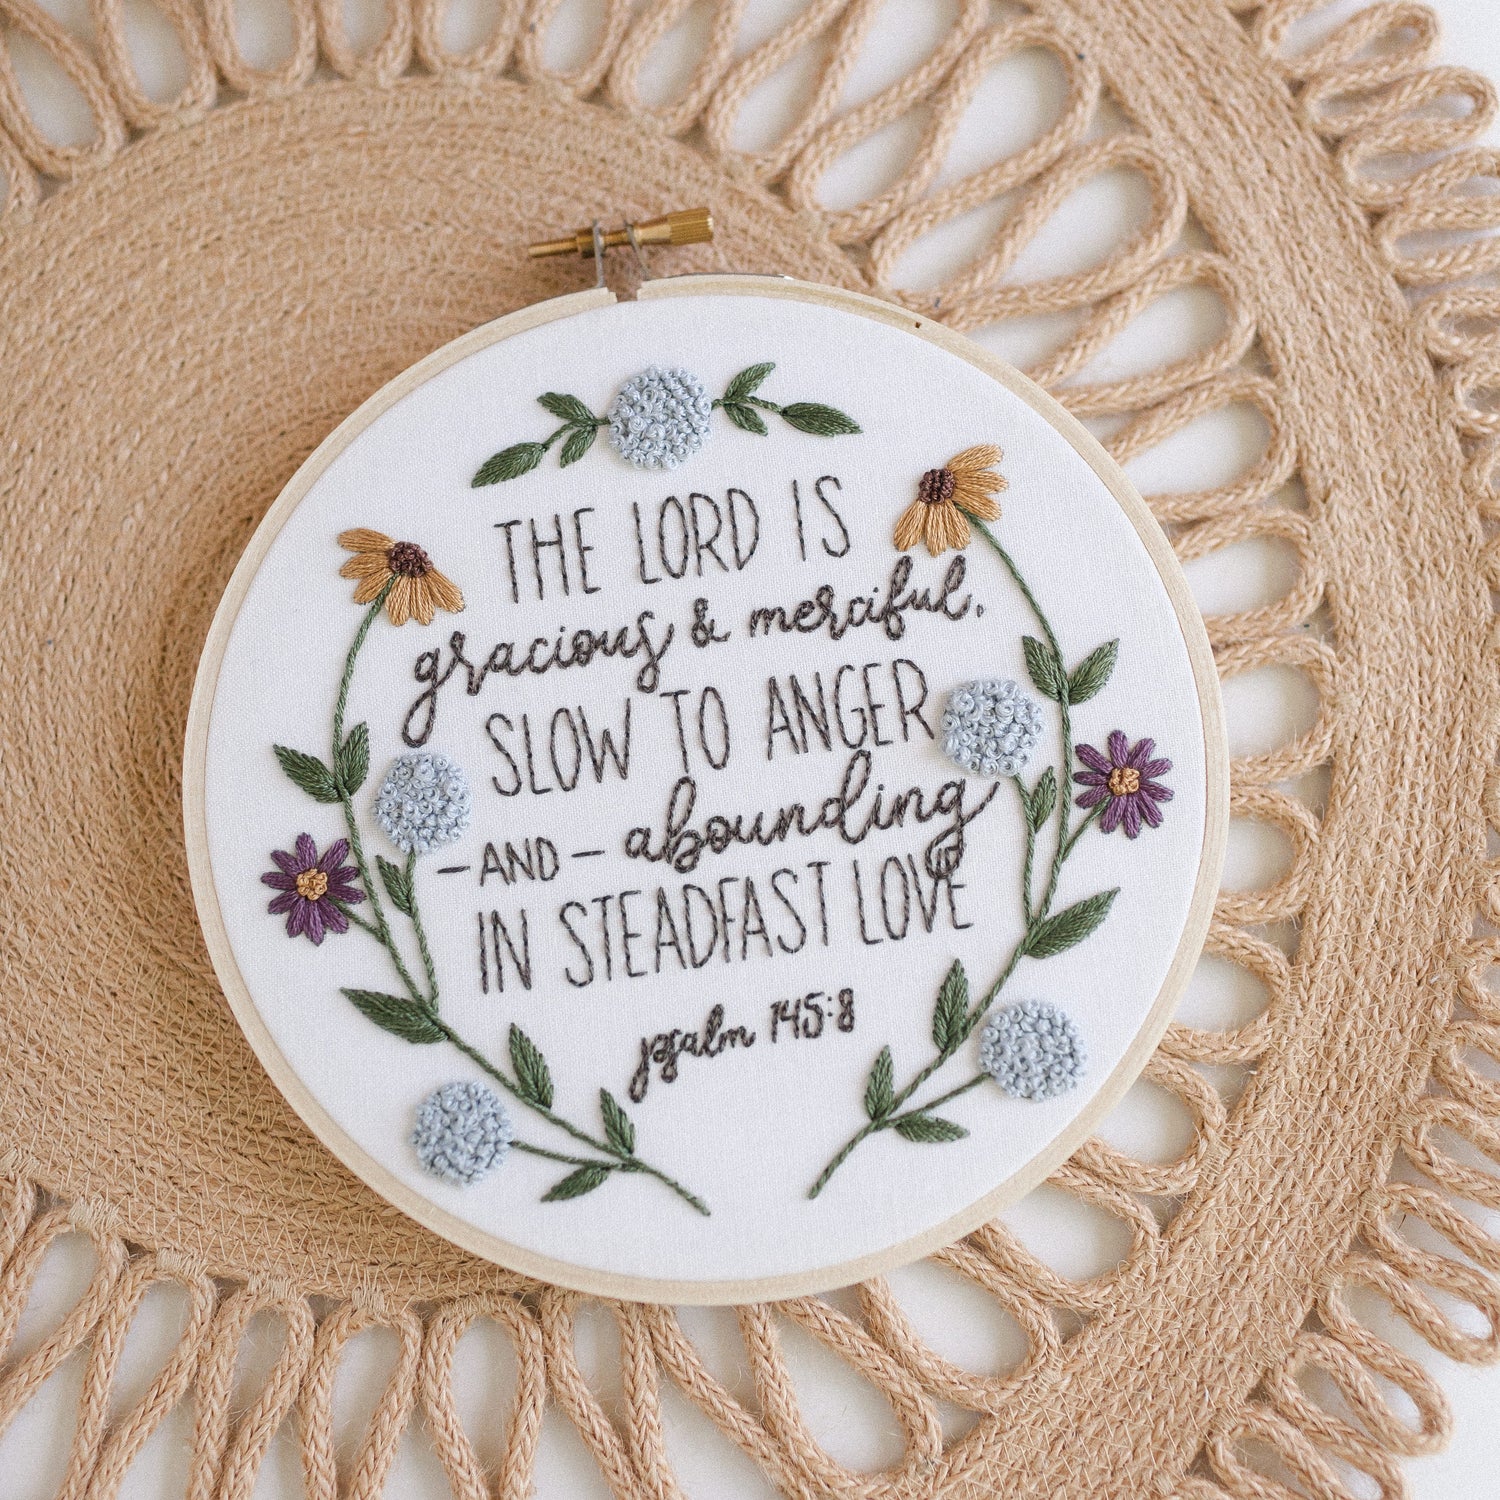 The Lord Is Gracious and Merciful” Embroidery Kit